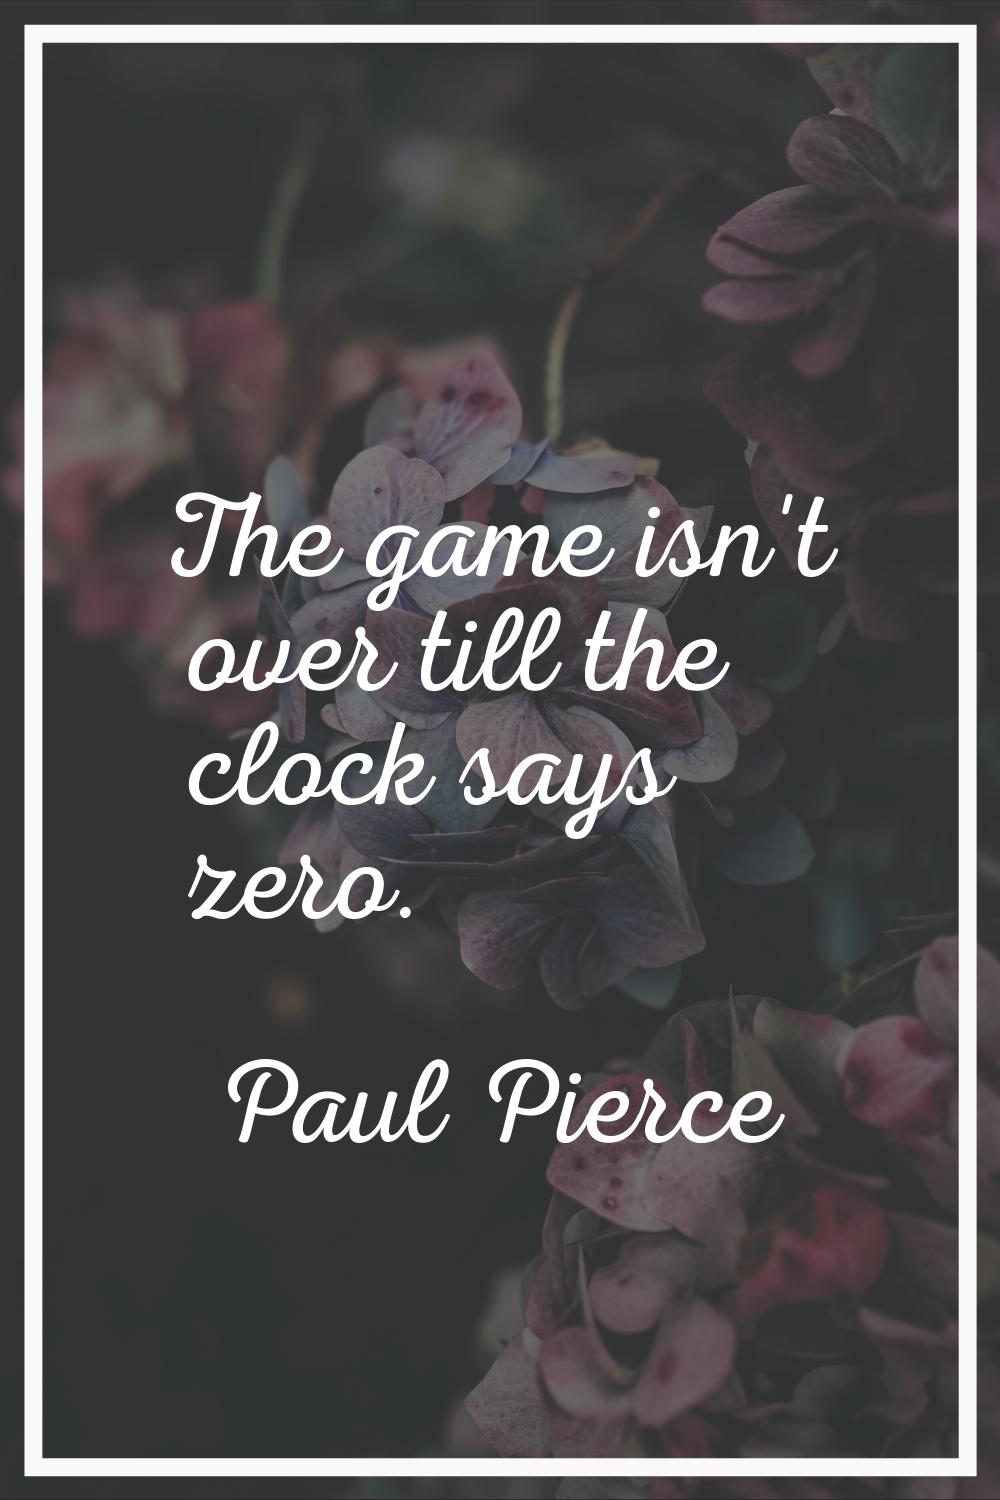 The game isn't over till the clock says zero.